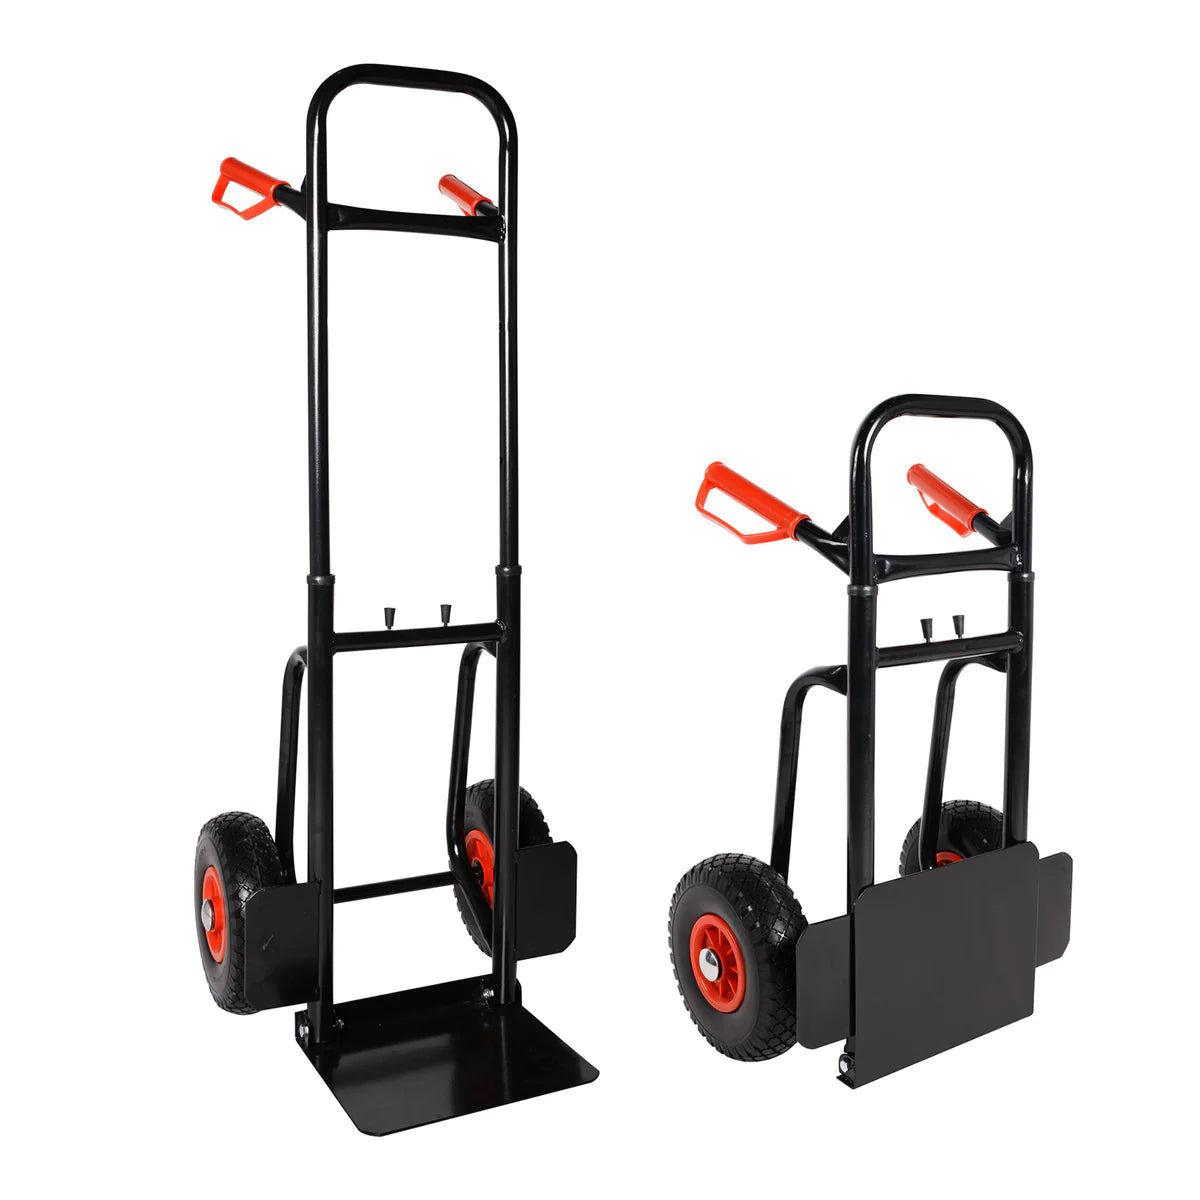 Two-wheeled trolley with Telescope Handle Adjustable height, 440lbs Capacity